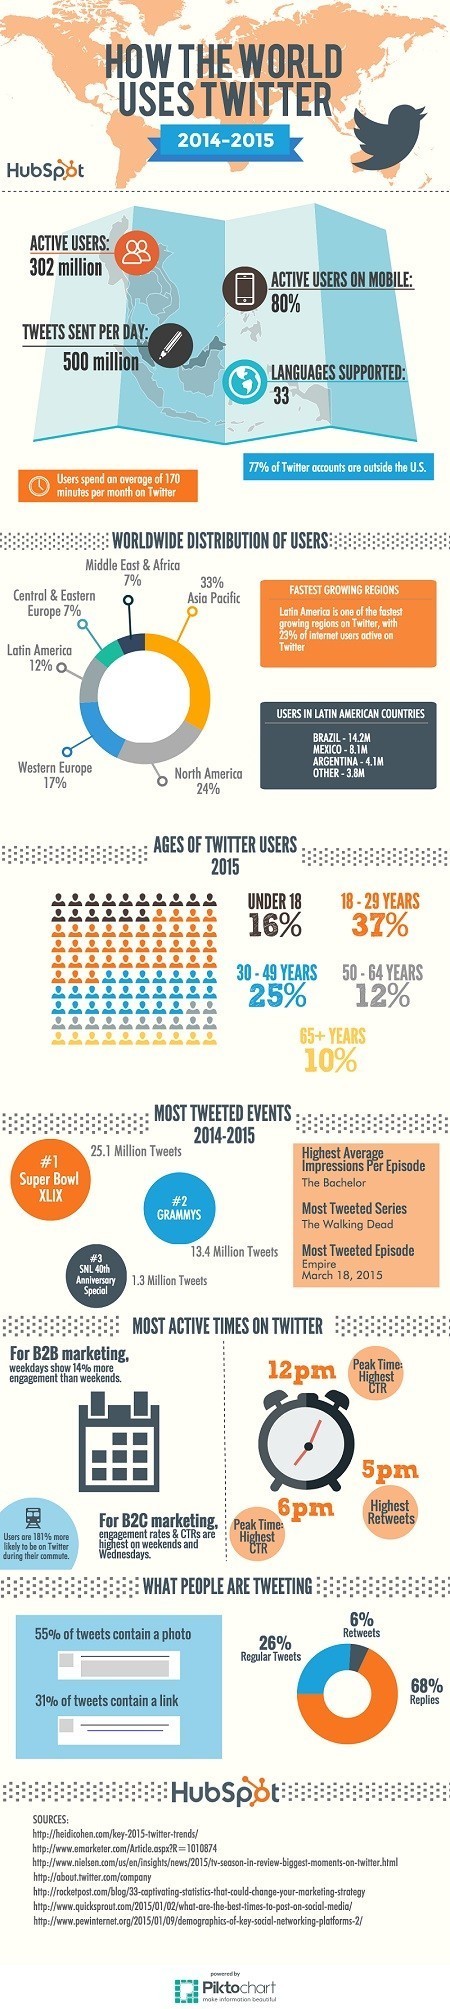 How the World Uses Twitter [Infographic] | :: The 4th Era :: | Scoop.it